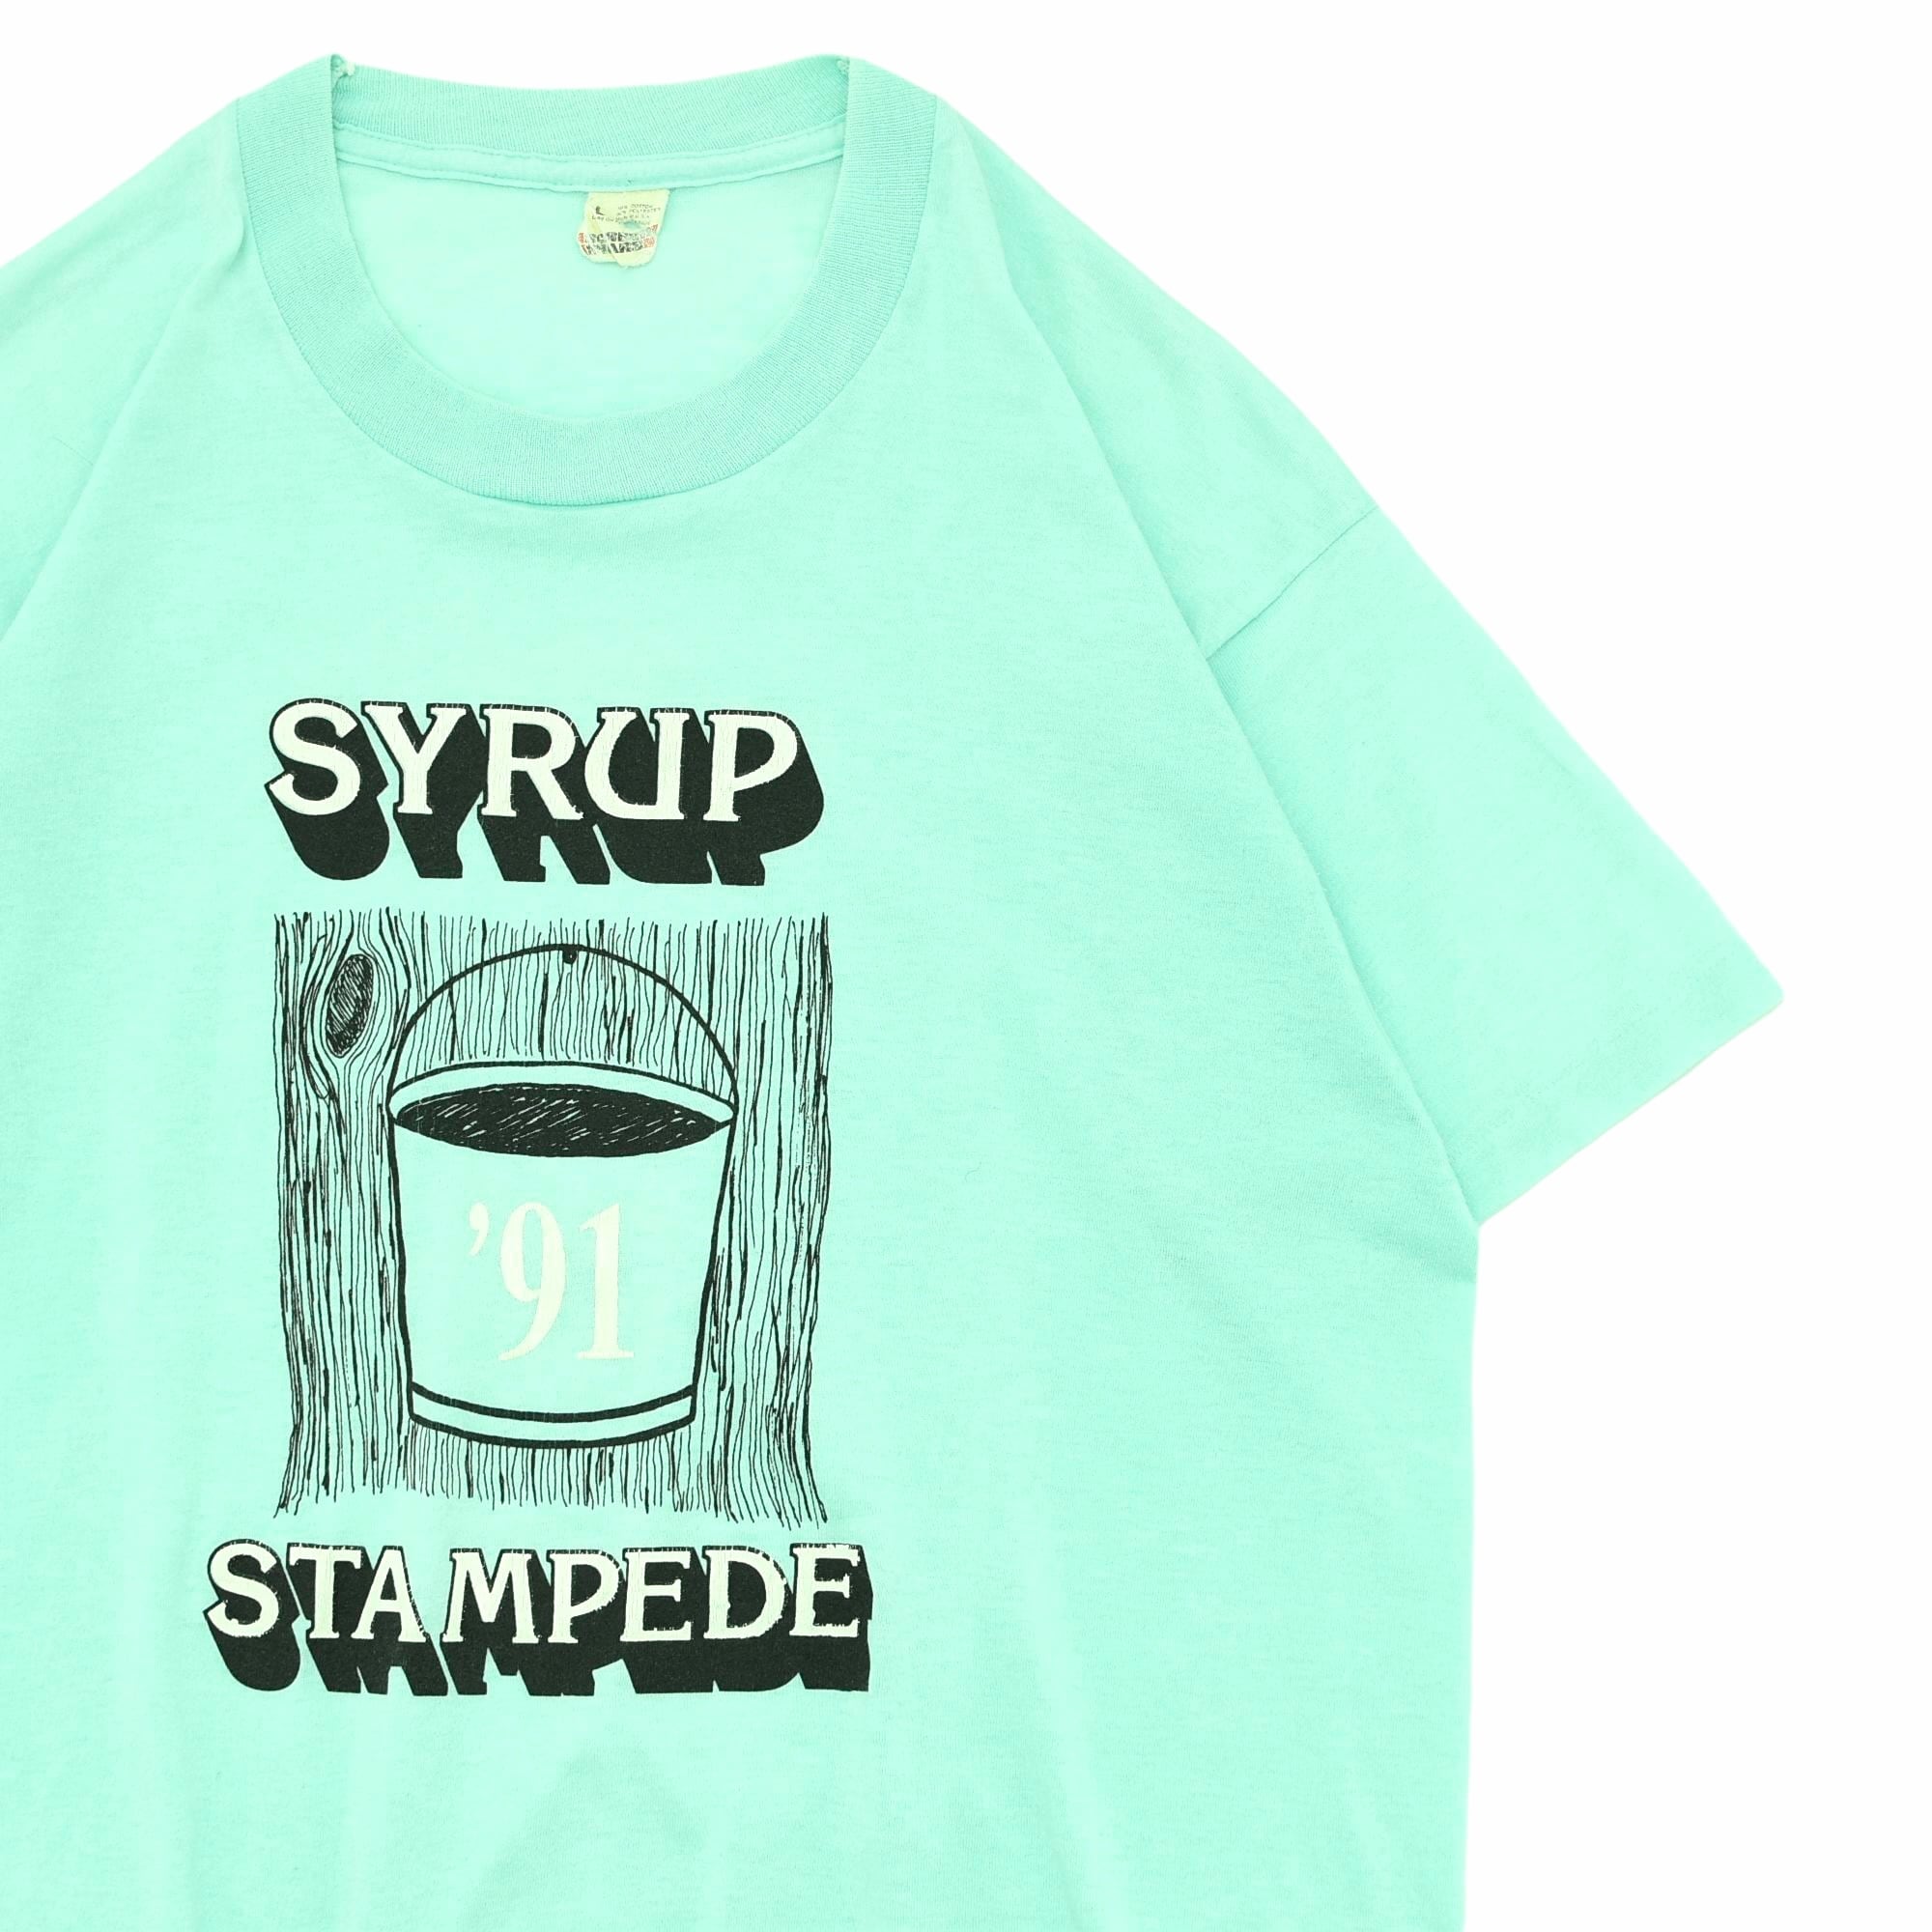 80s SCREEN STARS "syrup stampede" Tshirt